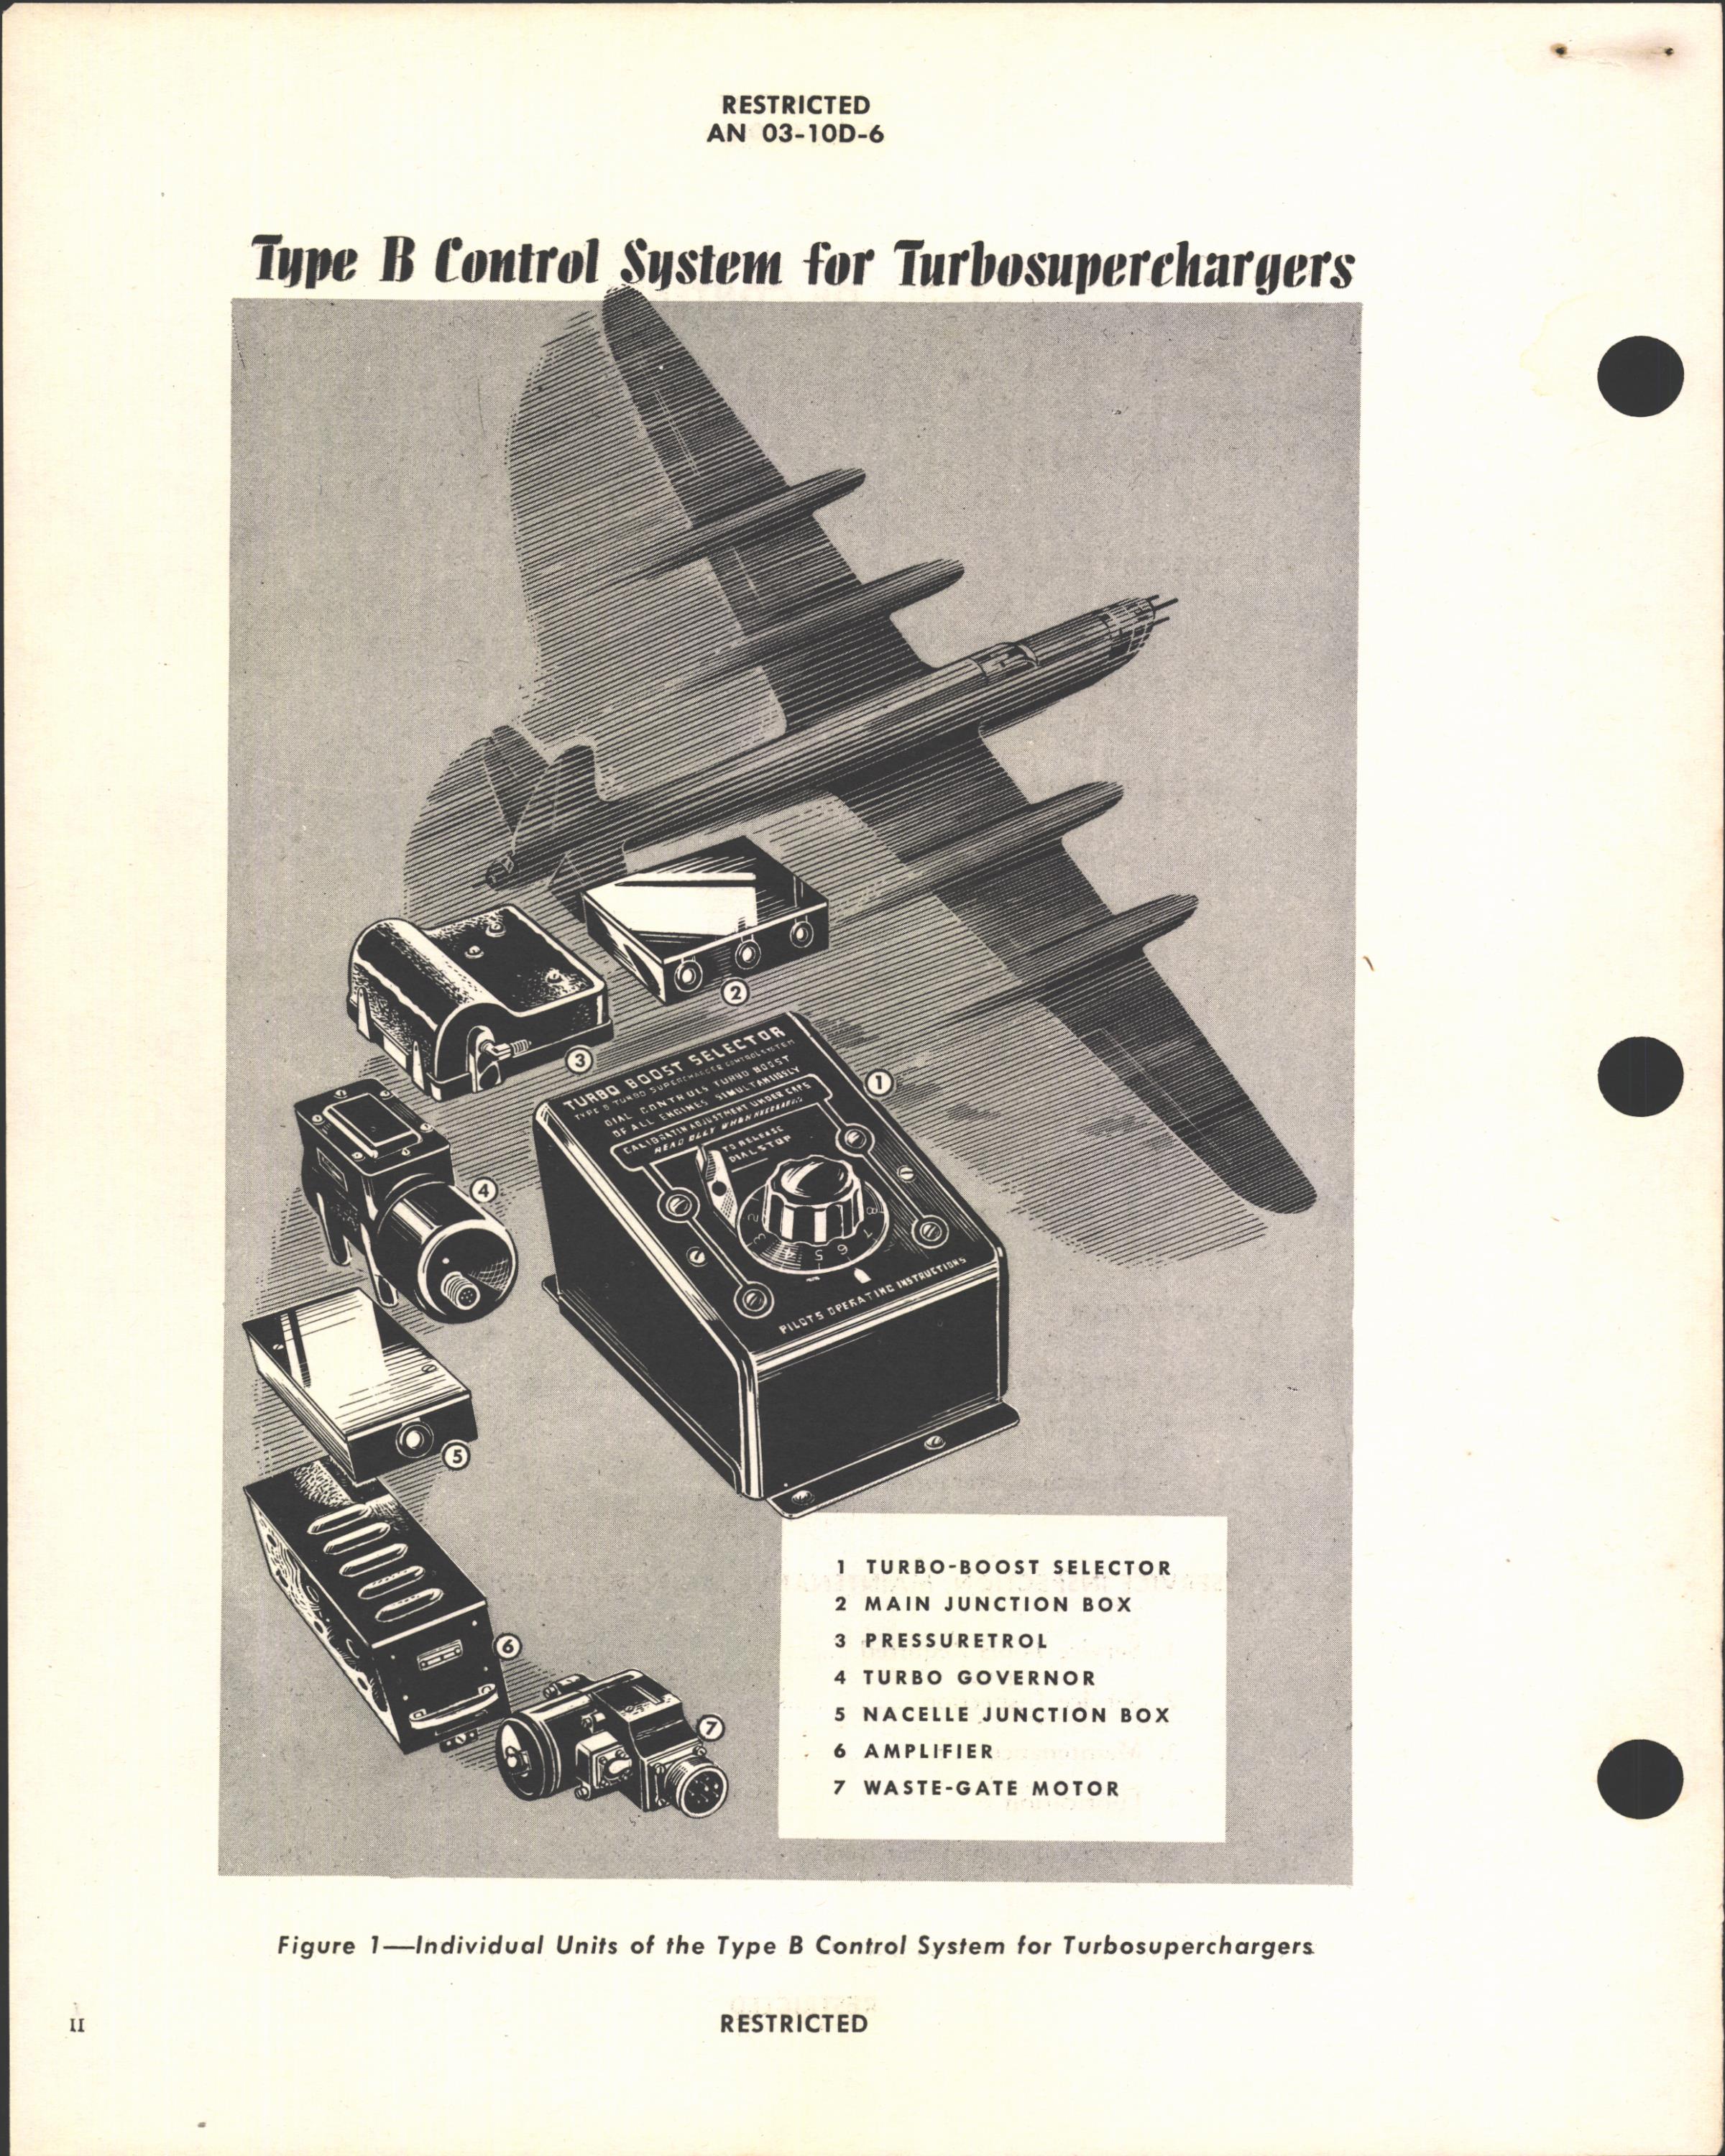 Sample page 4 from AirCorps Library document: Operation & Service Instructions for Type B Electronic Control System for Turbosuperchargers